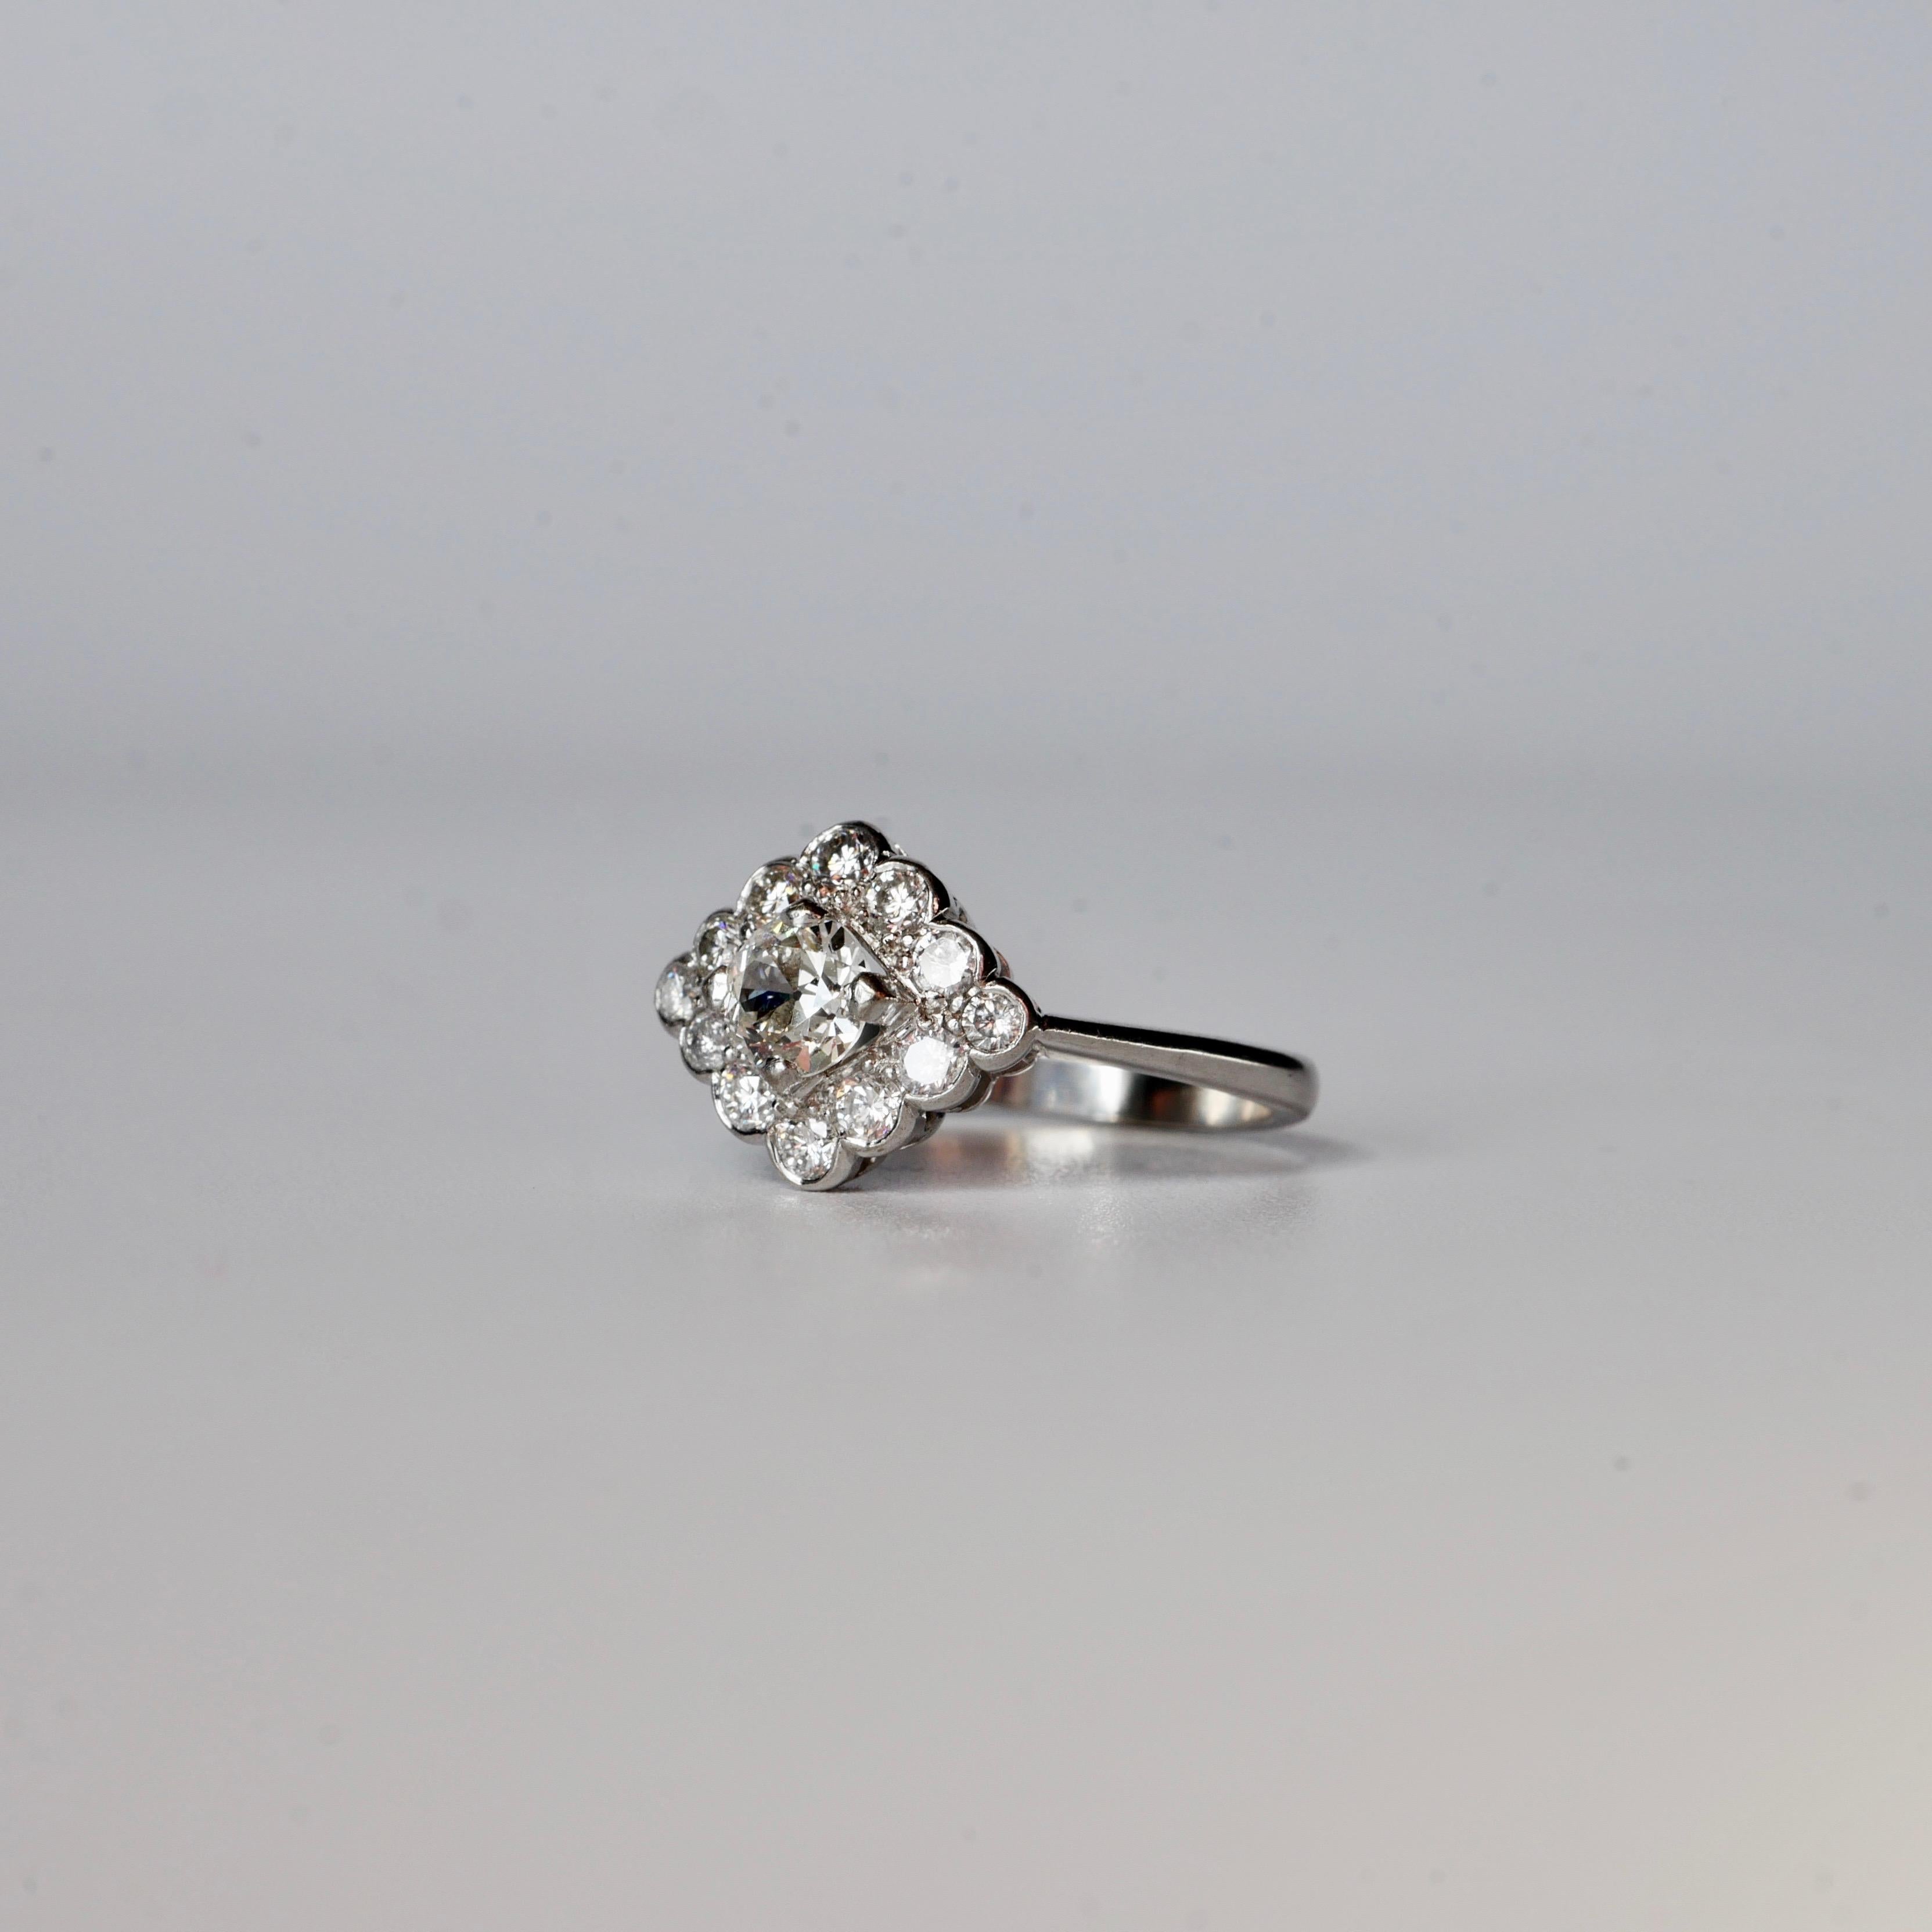 Diamonds 1.00ct Total Weight

Diamond Colour G/H

Diamond Clarity principal stone VS2

Diamond Clarity Accent Diamonds VS2/SI1

18k White Gold

Wow and Wow again 

Isn't this gorgeous, such a pretty vintage ring, ideal for an engagement ring or